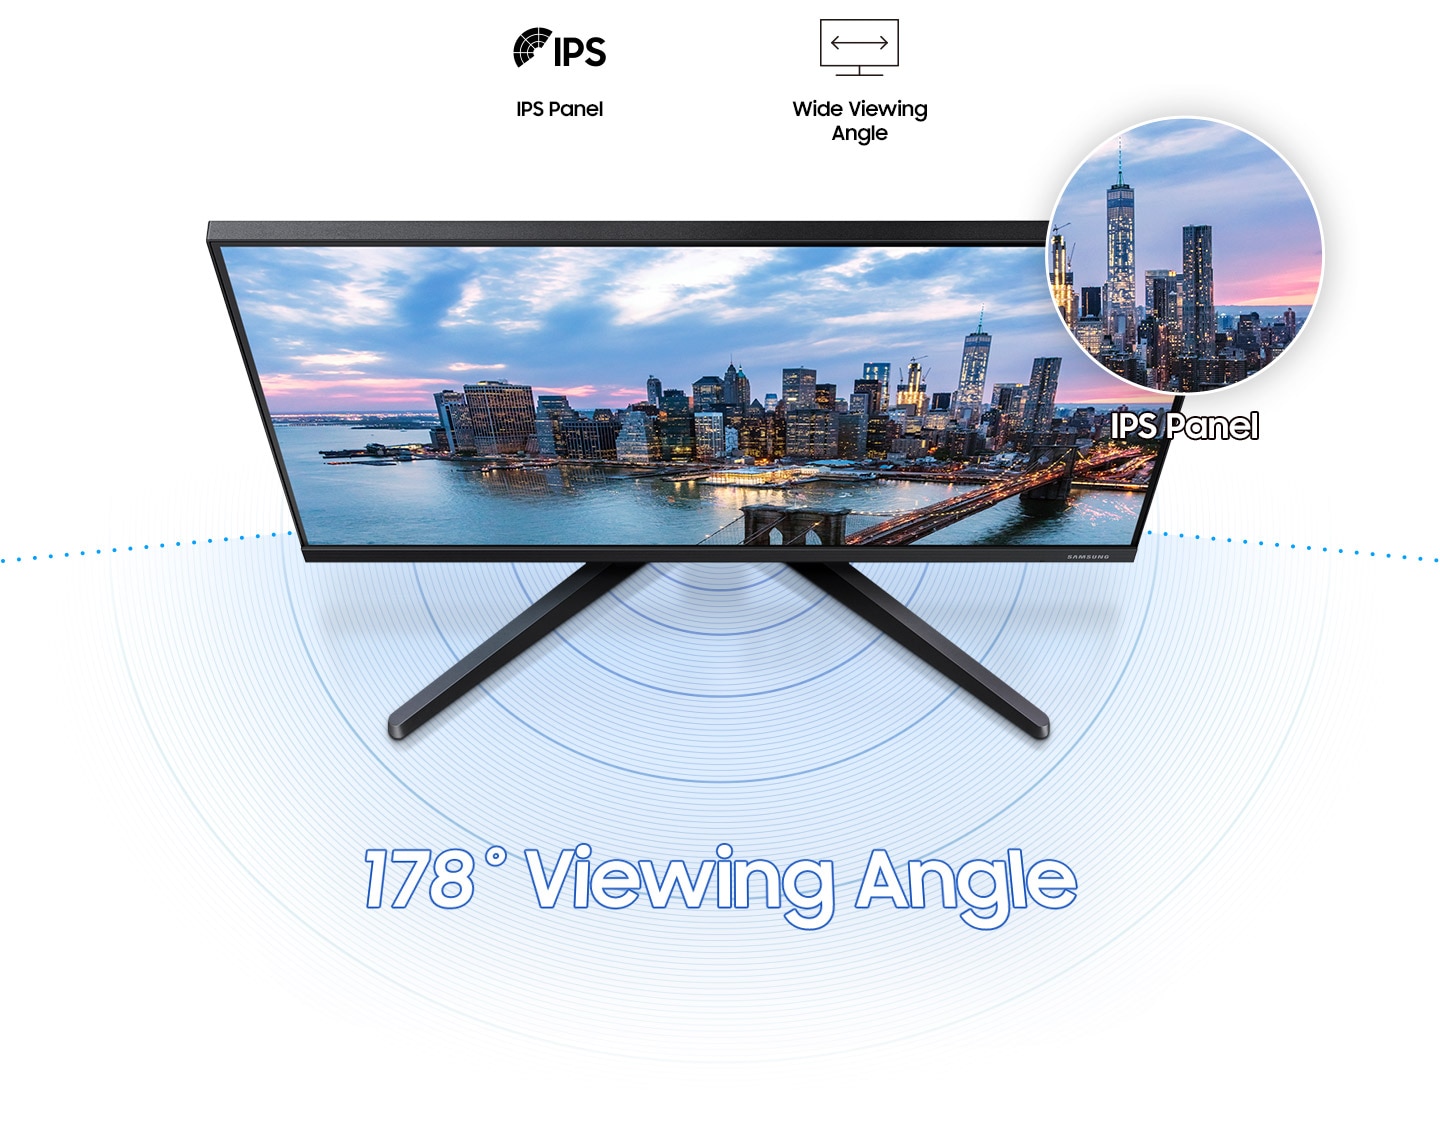 With IPS and wide viewing angle icons, overhead view of the monitor emphasizes 178º wide viewing angle and clear color reproduction of IPS panel